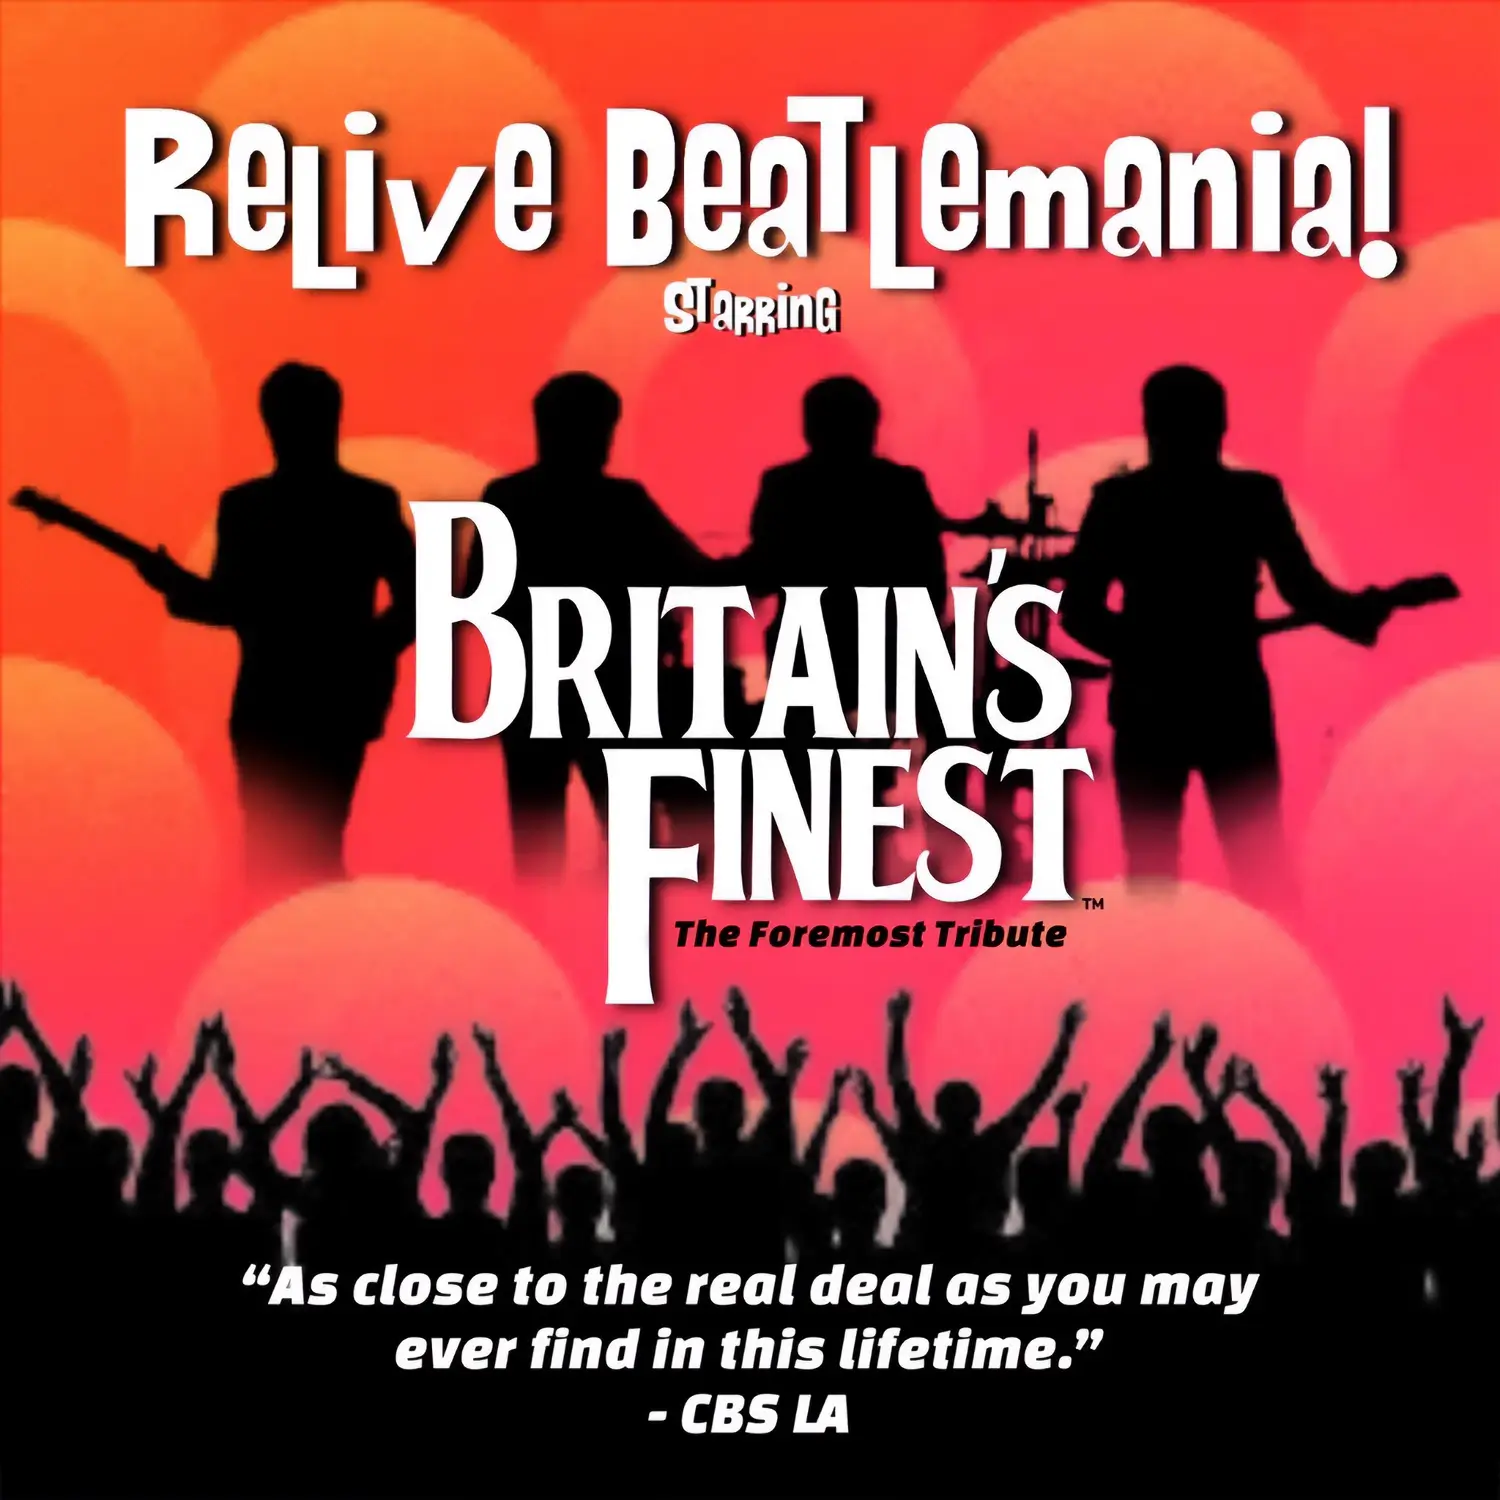 Britain's Finest: the Foremost Tribute to The Beatles